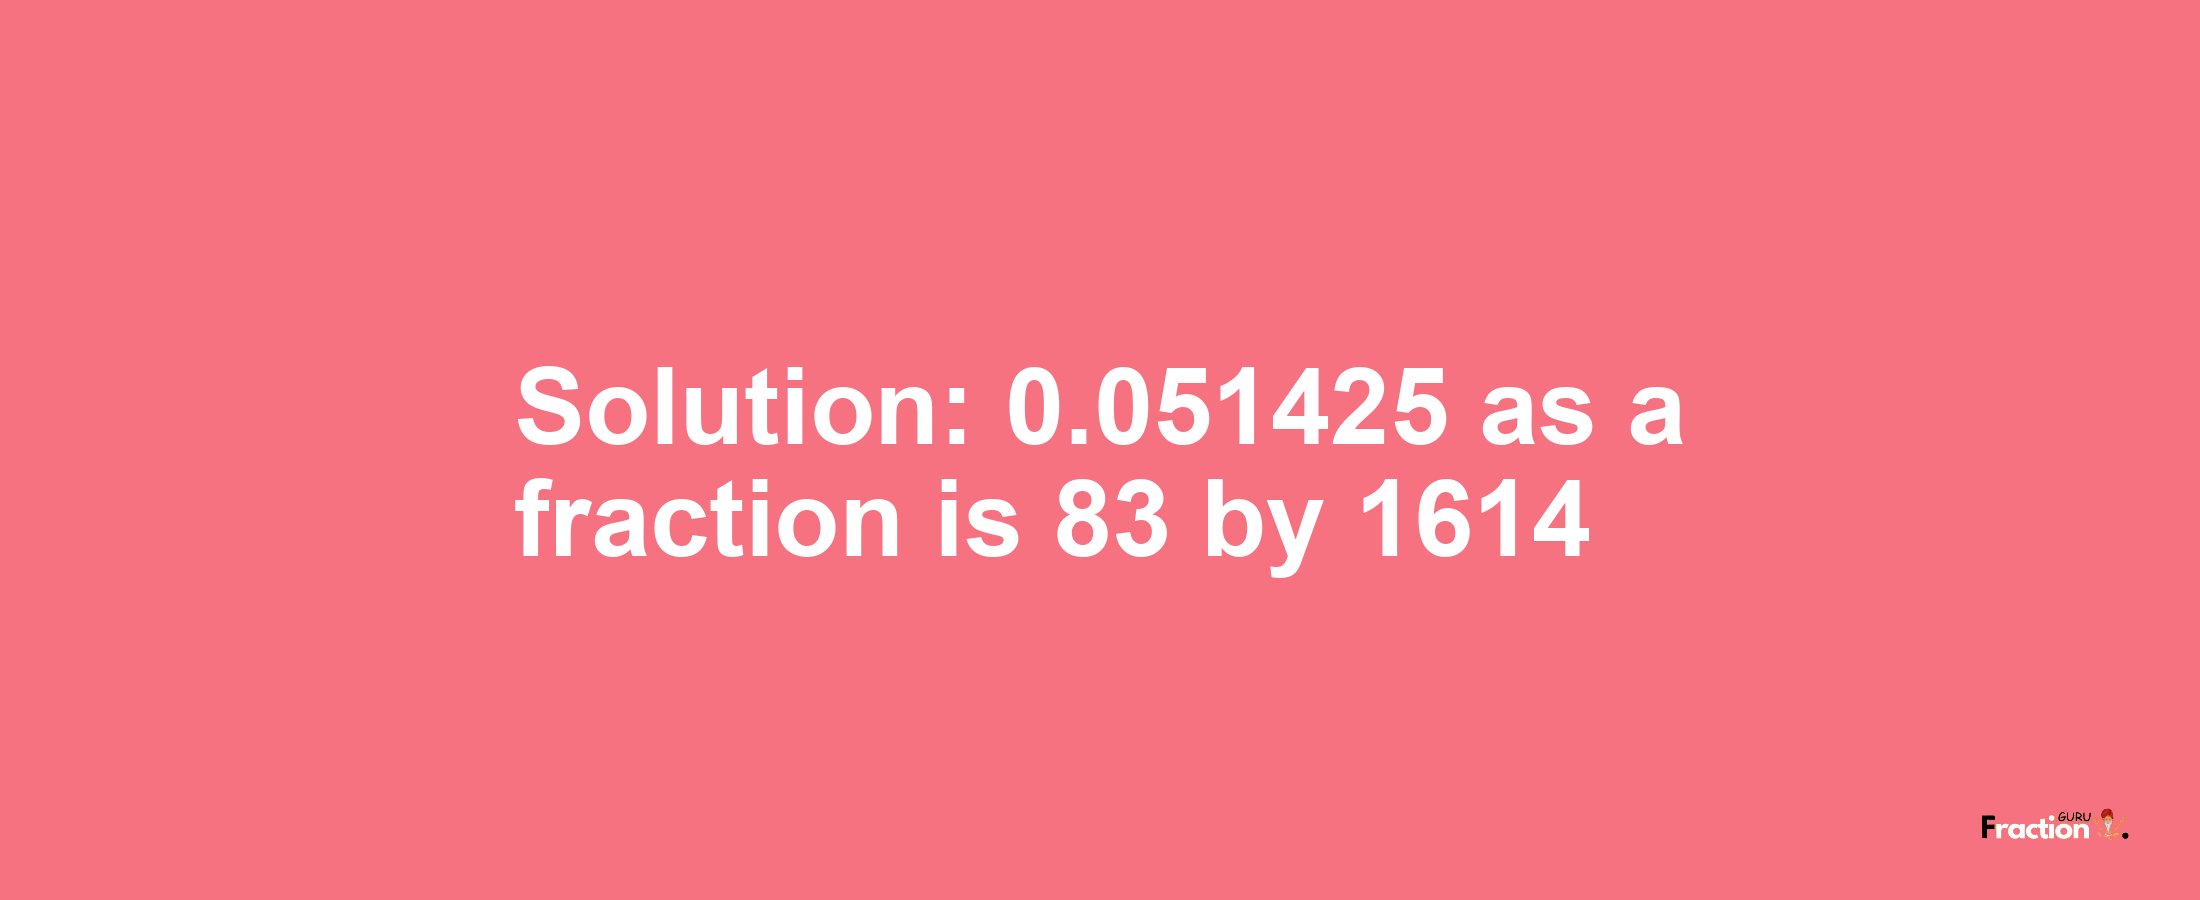 Solution:0.051425 as a fraction is 83/1614